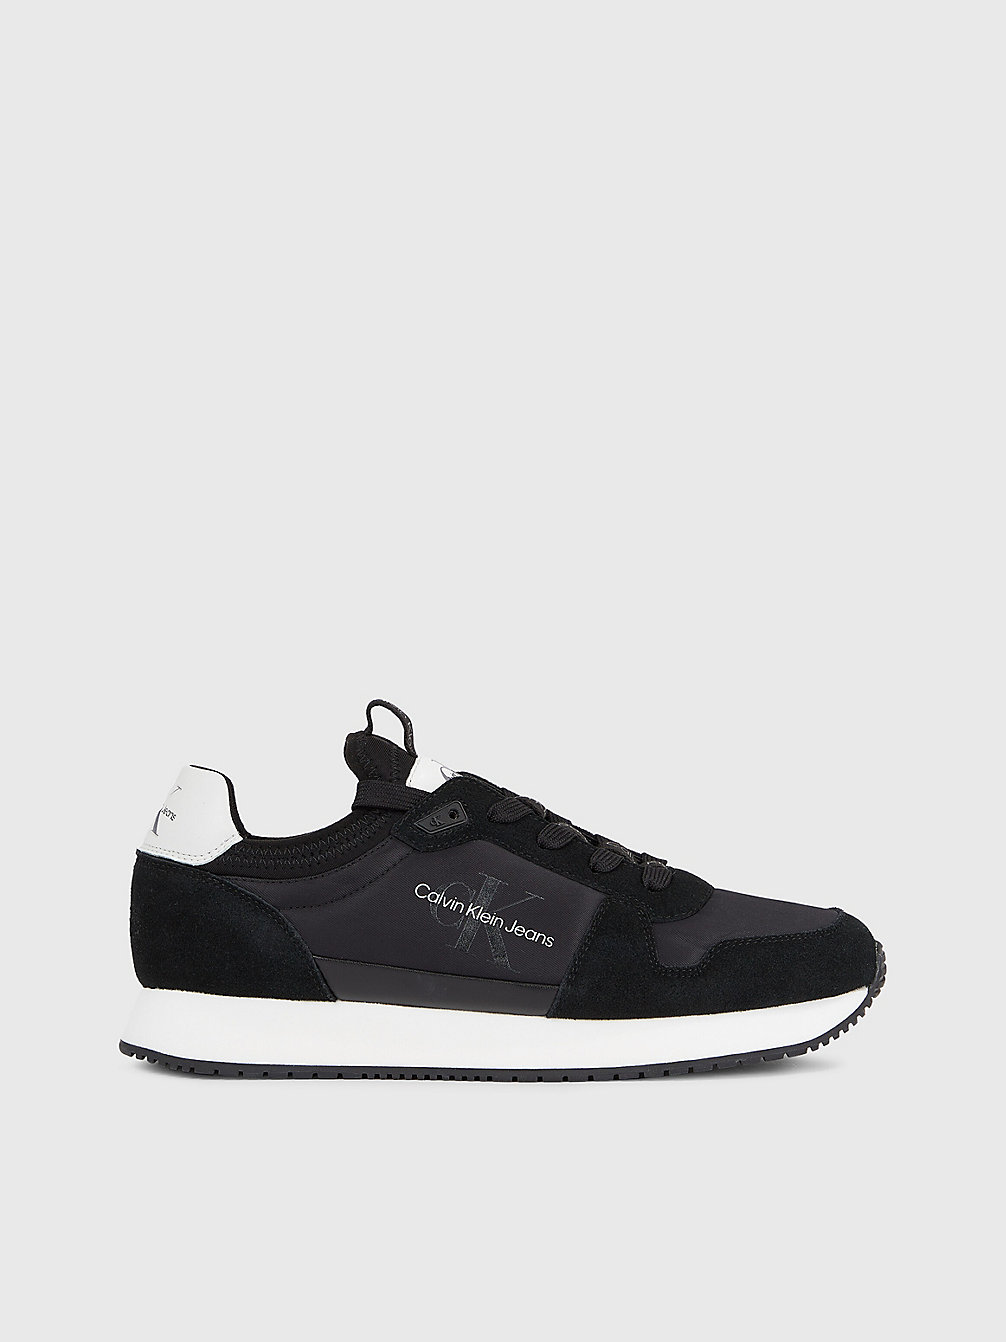 BLACK/BRIGHT WHITE Recycled Nylon Trainers undefined men Calvin Klein